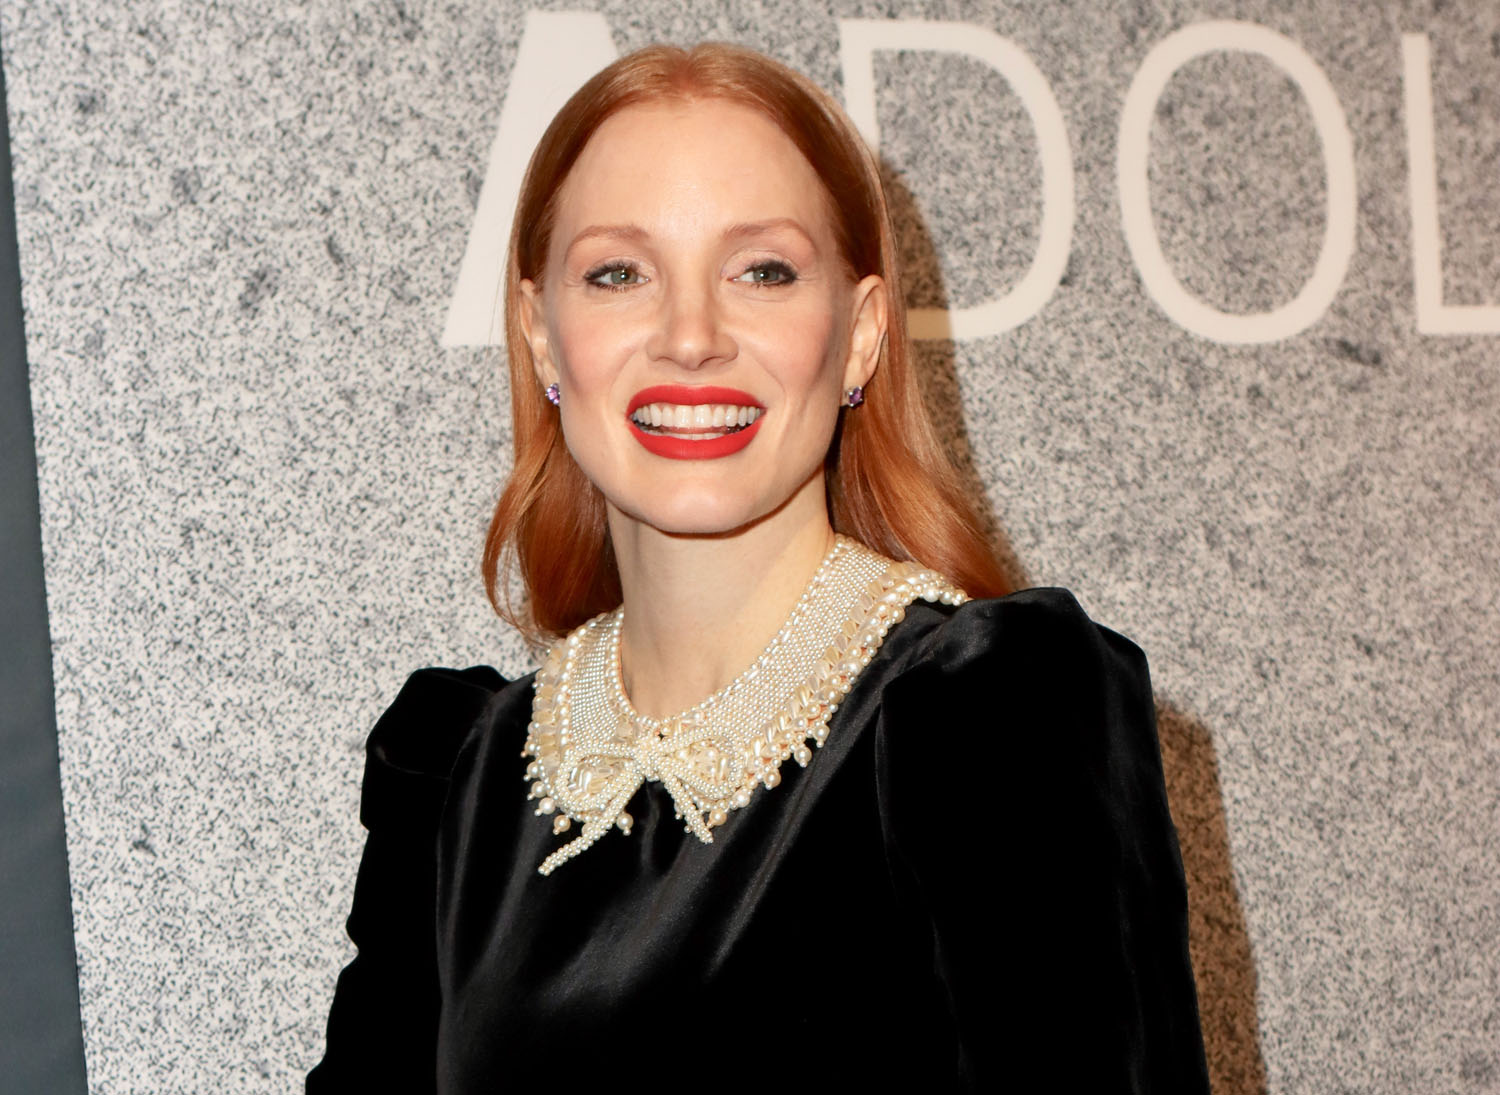 Jessica Chastain on opening night